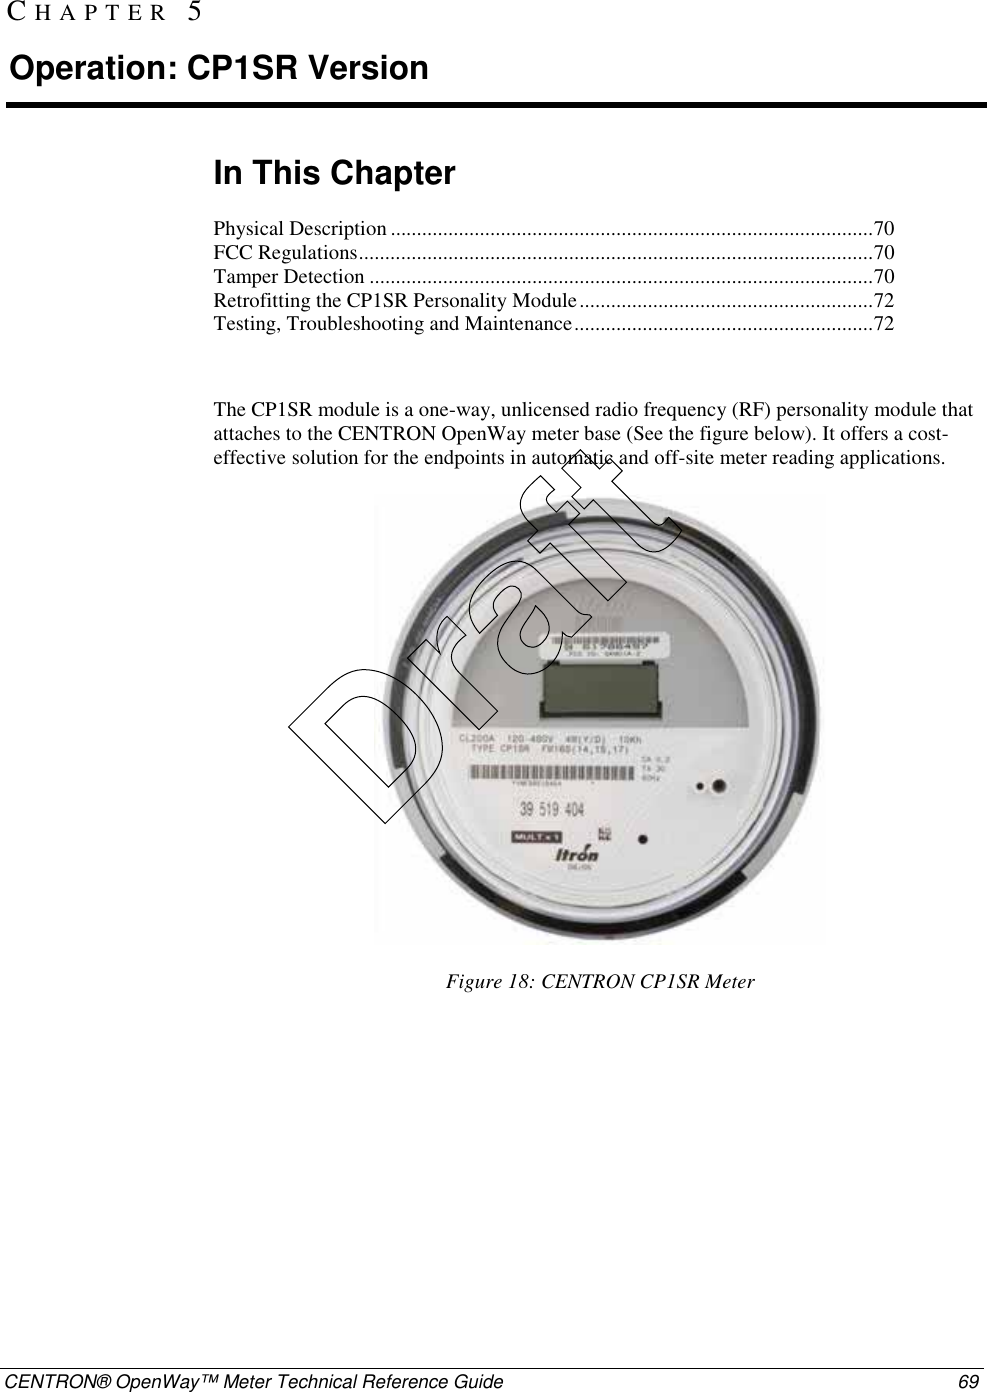  CENTRON® OpenWay™ Meter Technical Reference Guide  69  In This Chapter Physical Description ............................................................................................70 FCC Regulations..................................................................................................70 Tamper Detection ................................................................................................70 Retrofitting the CP1SR Personality Module........................................................72 Testing, Troubleshooting and Maintenance.........................................................72  The CP1SR module is a one-way, unlicensed radio frequency (RF) personality module that attaches to the CENTRON OpenWay meter base (See the figure below). It offers a cost-effective solution for the endpoints in automatic and off-site meter reading applications.  Figure 18: CENTRON CP1SR Meter CHAPTER 5 Operation: CP1SR Version Draft